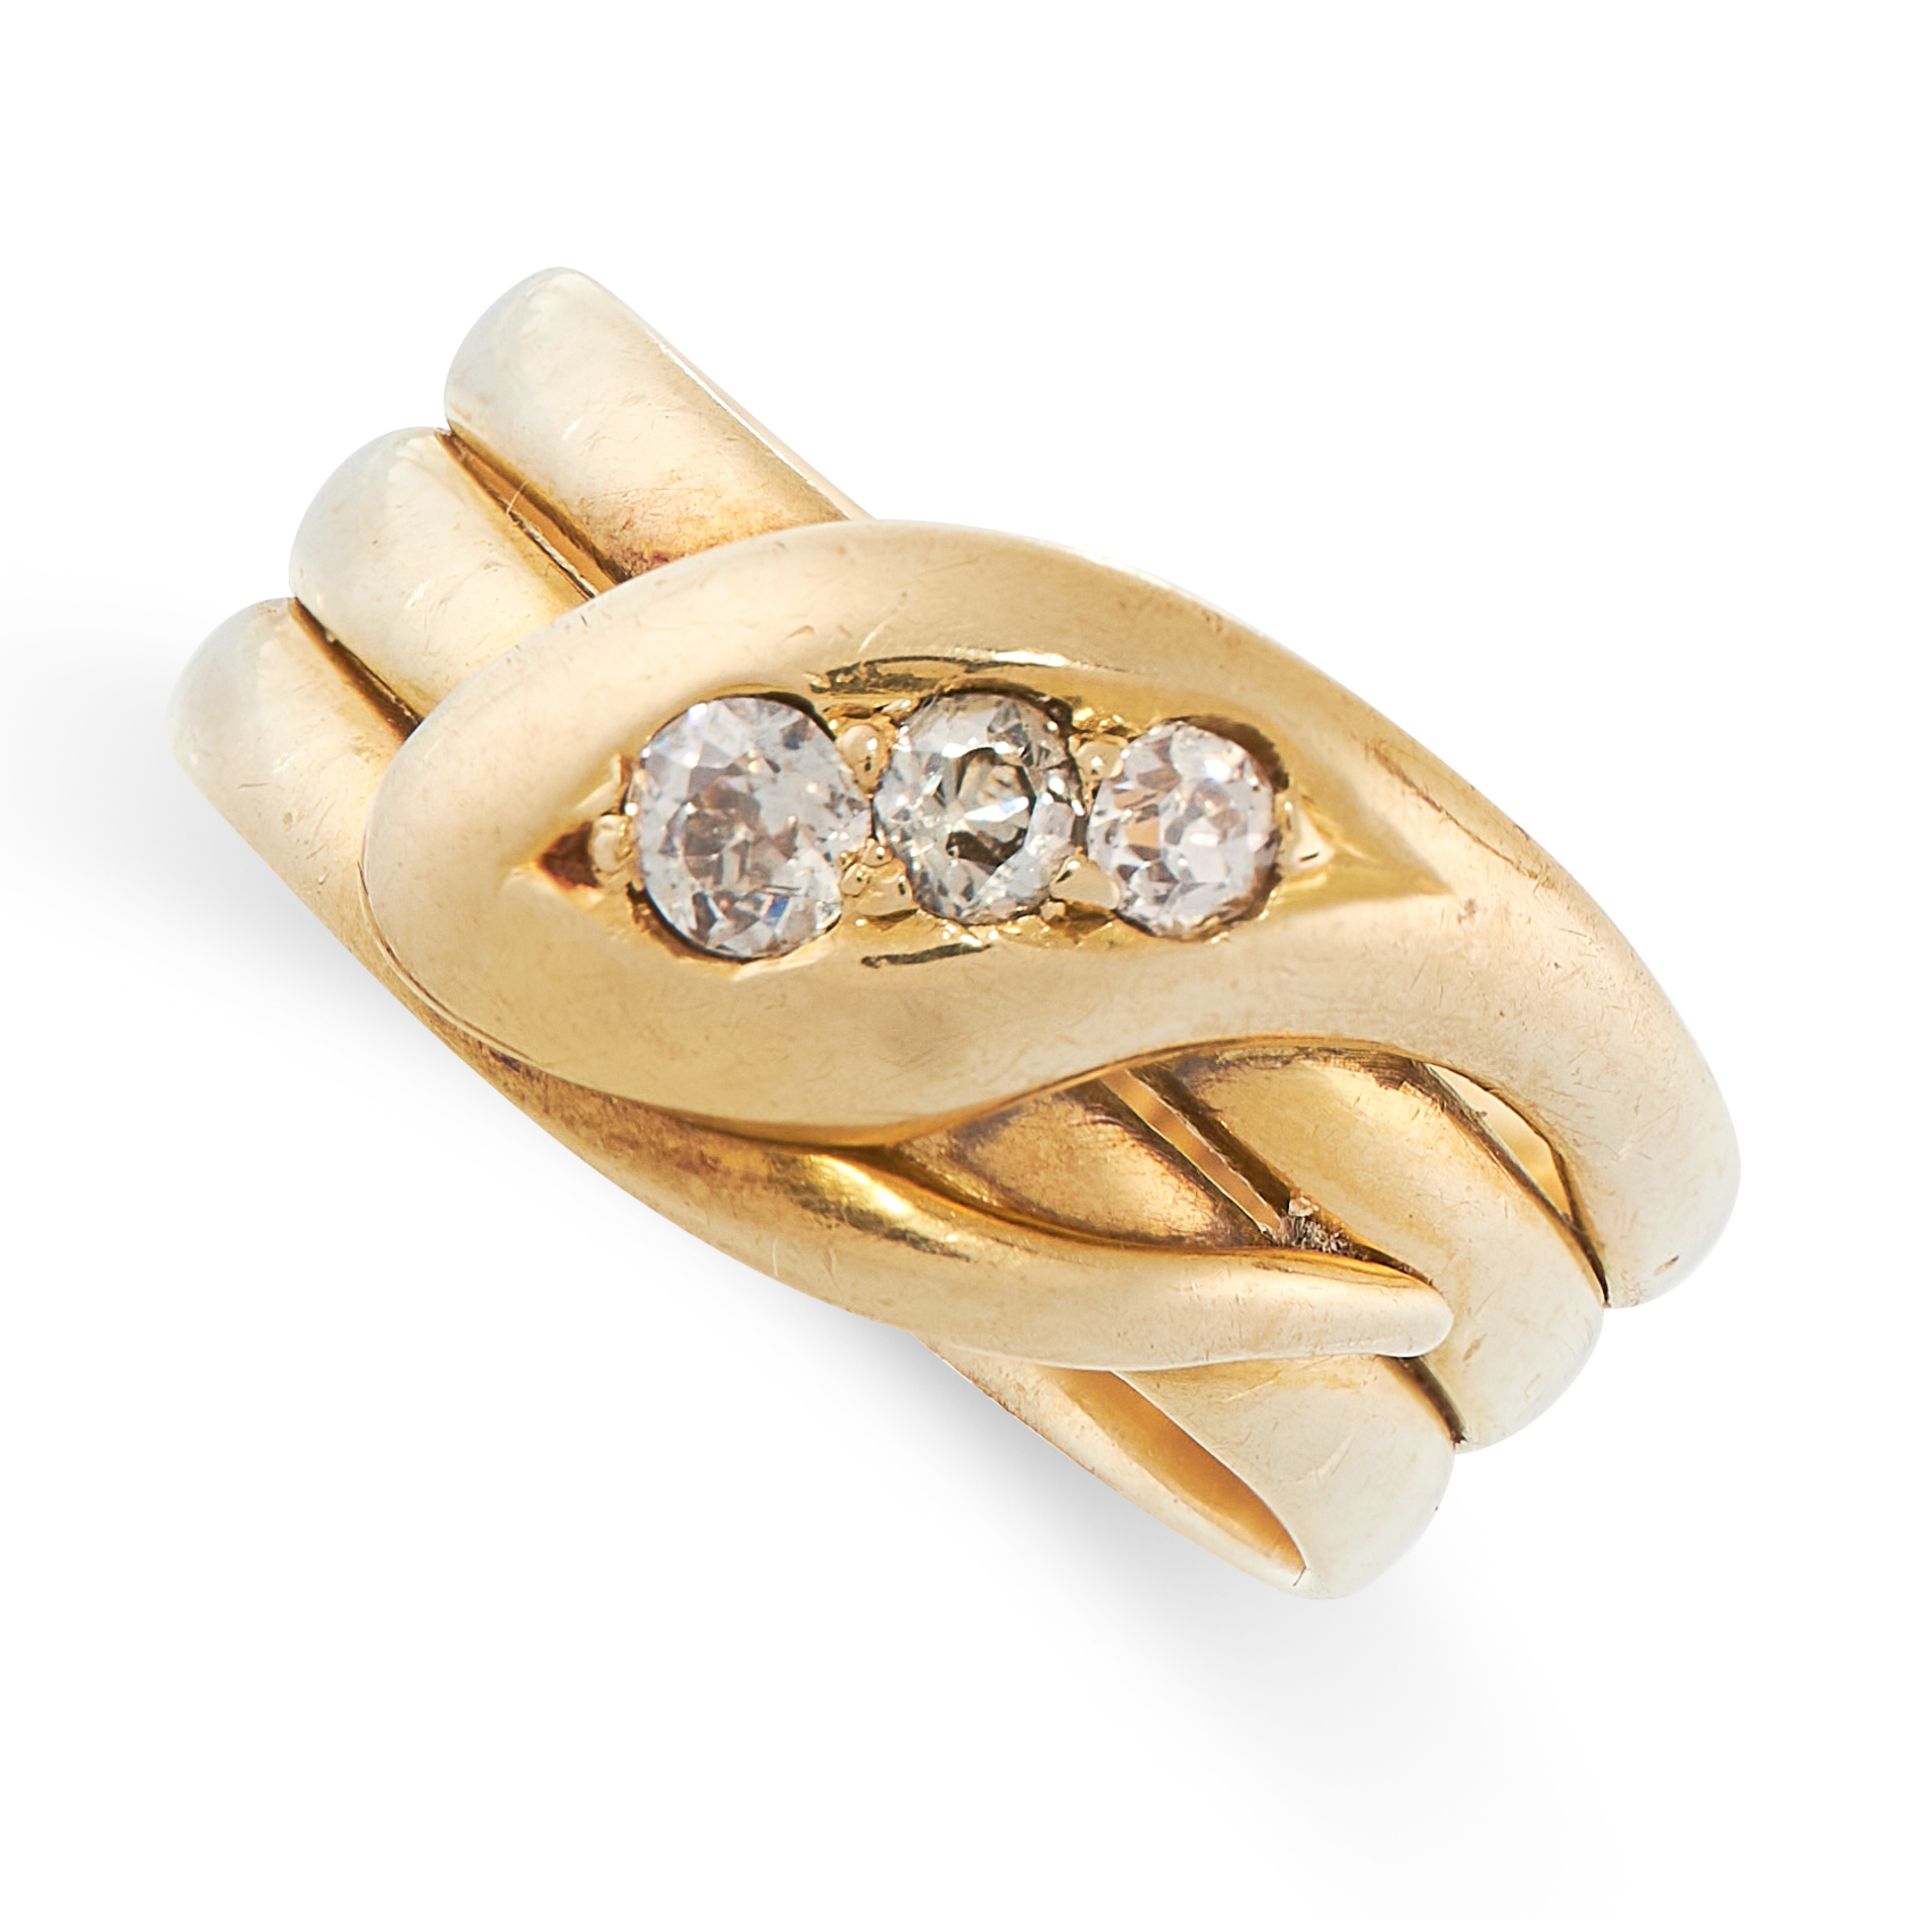 A DIAMOND SNAKE RING, 1924 in 18ct yellow gold, designed as a coiled snake, set with three old cut